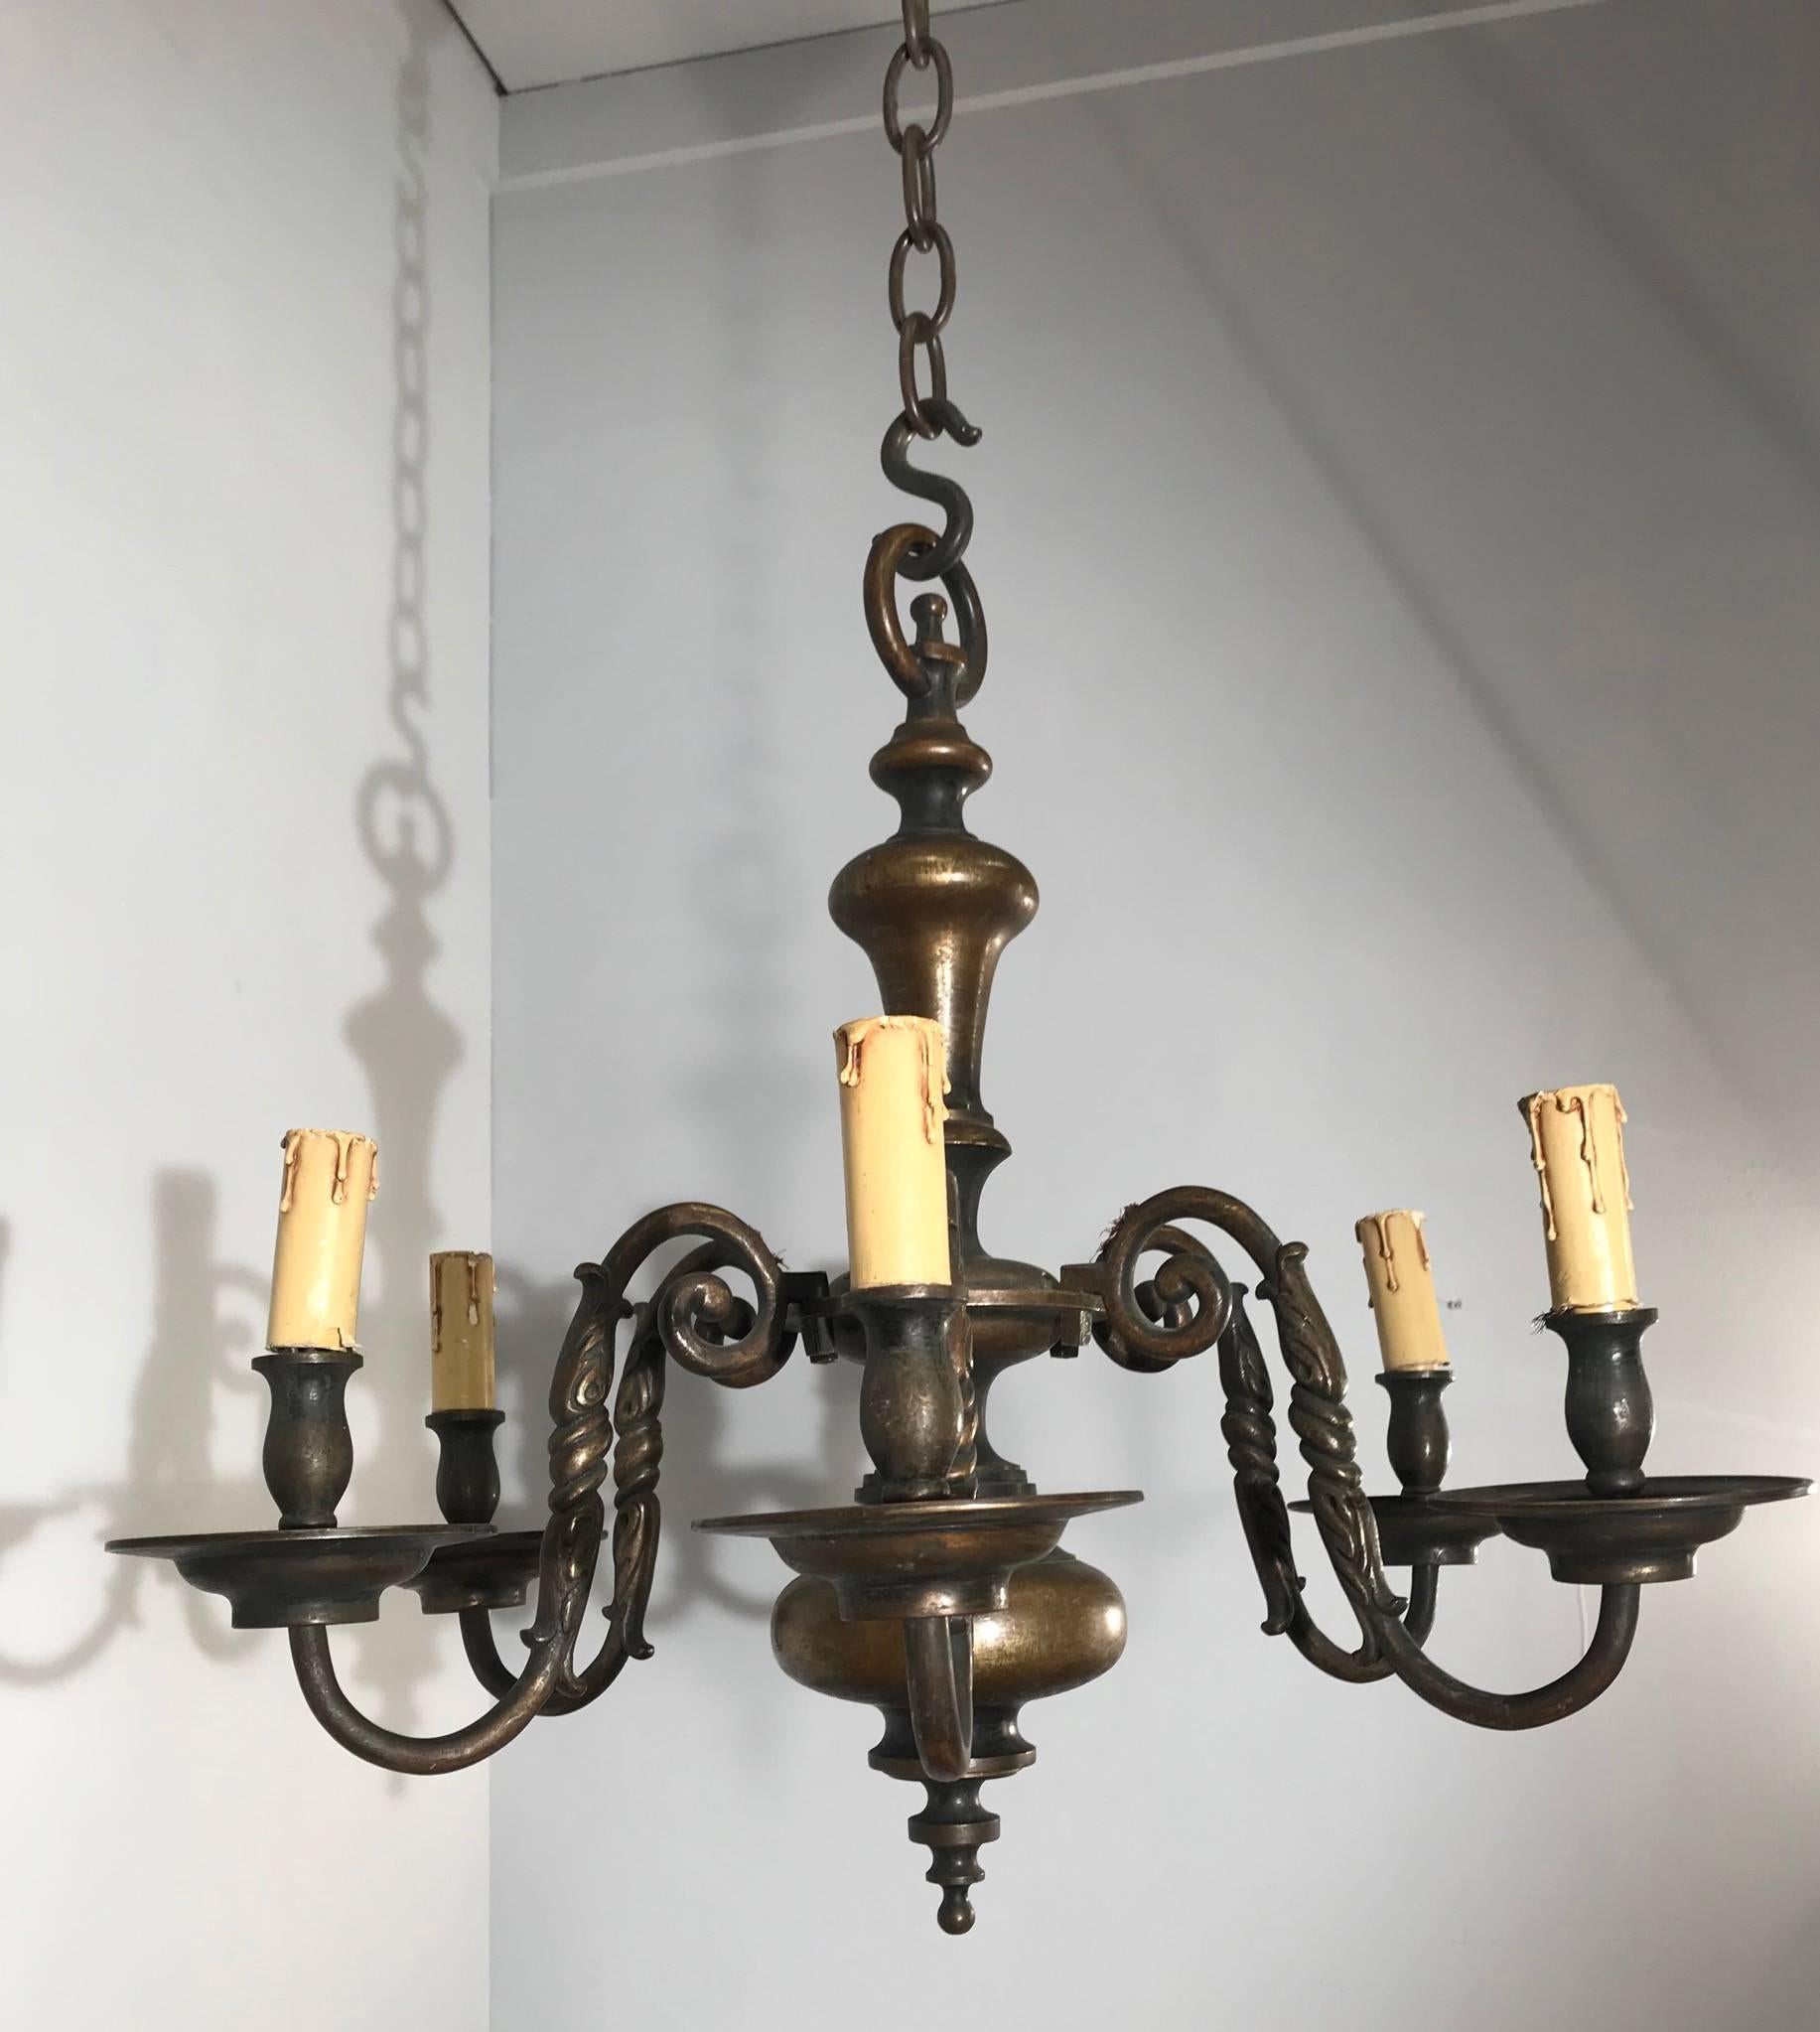 Hand-Crafted Antique Classic Design Heavy Bronze Six-Arm Candle or Electric Chandelier